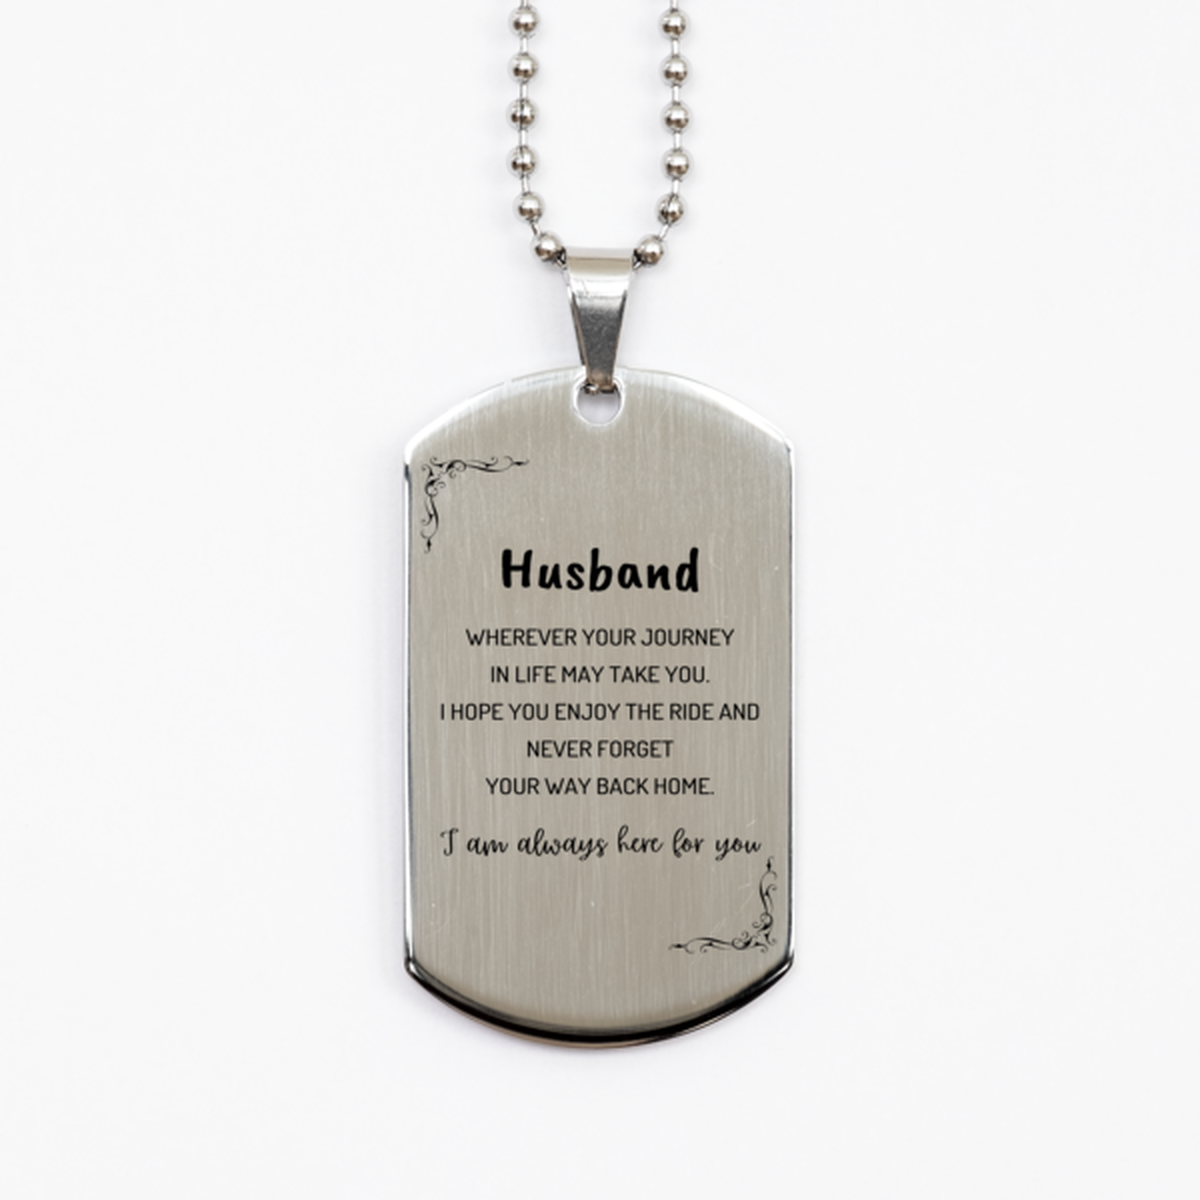 Husband wherever your journey in life may take you, I am always here for you Husband Silver Dog Tag, Awesome Christmas Gifts For Husband, Husband Birthday Gifts for Men Women Family Loved One